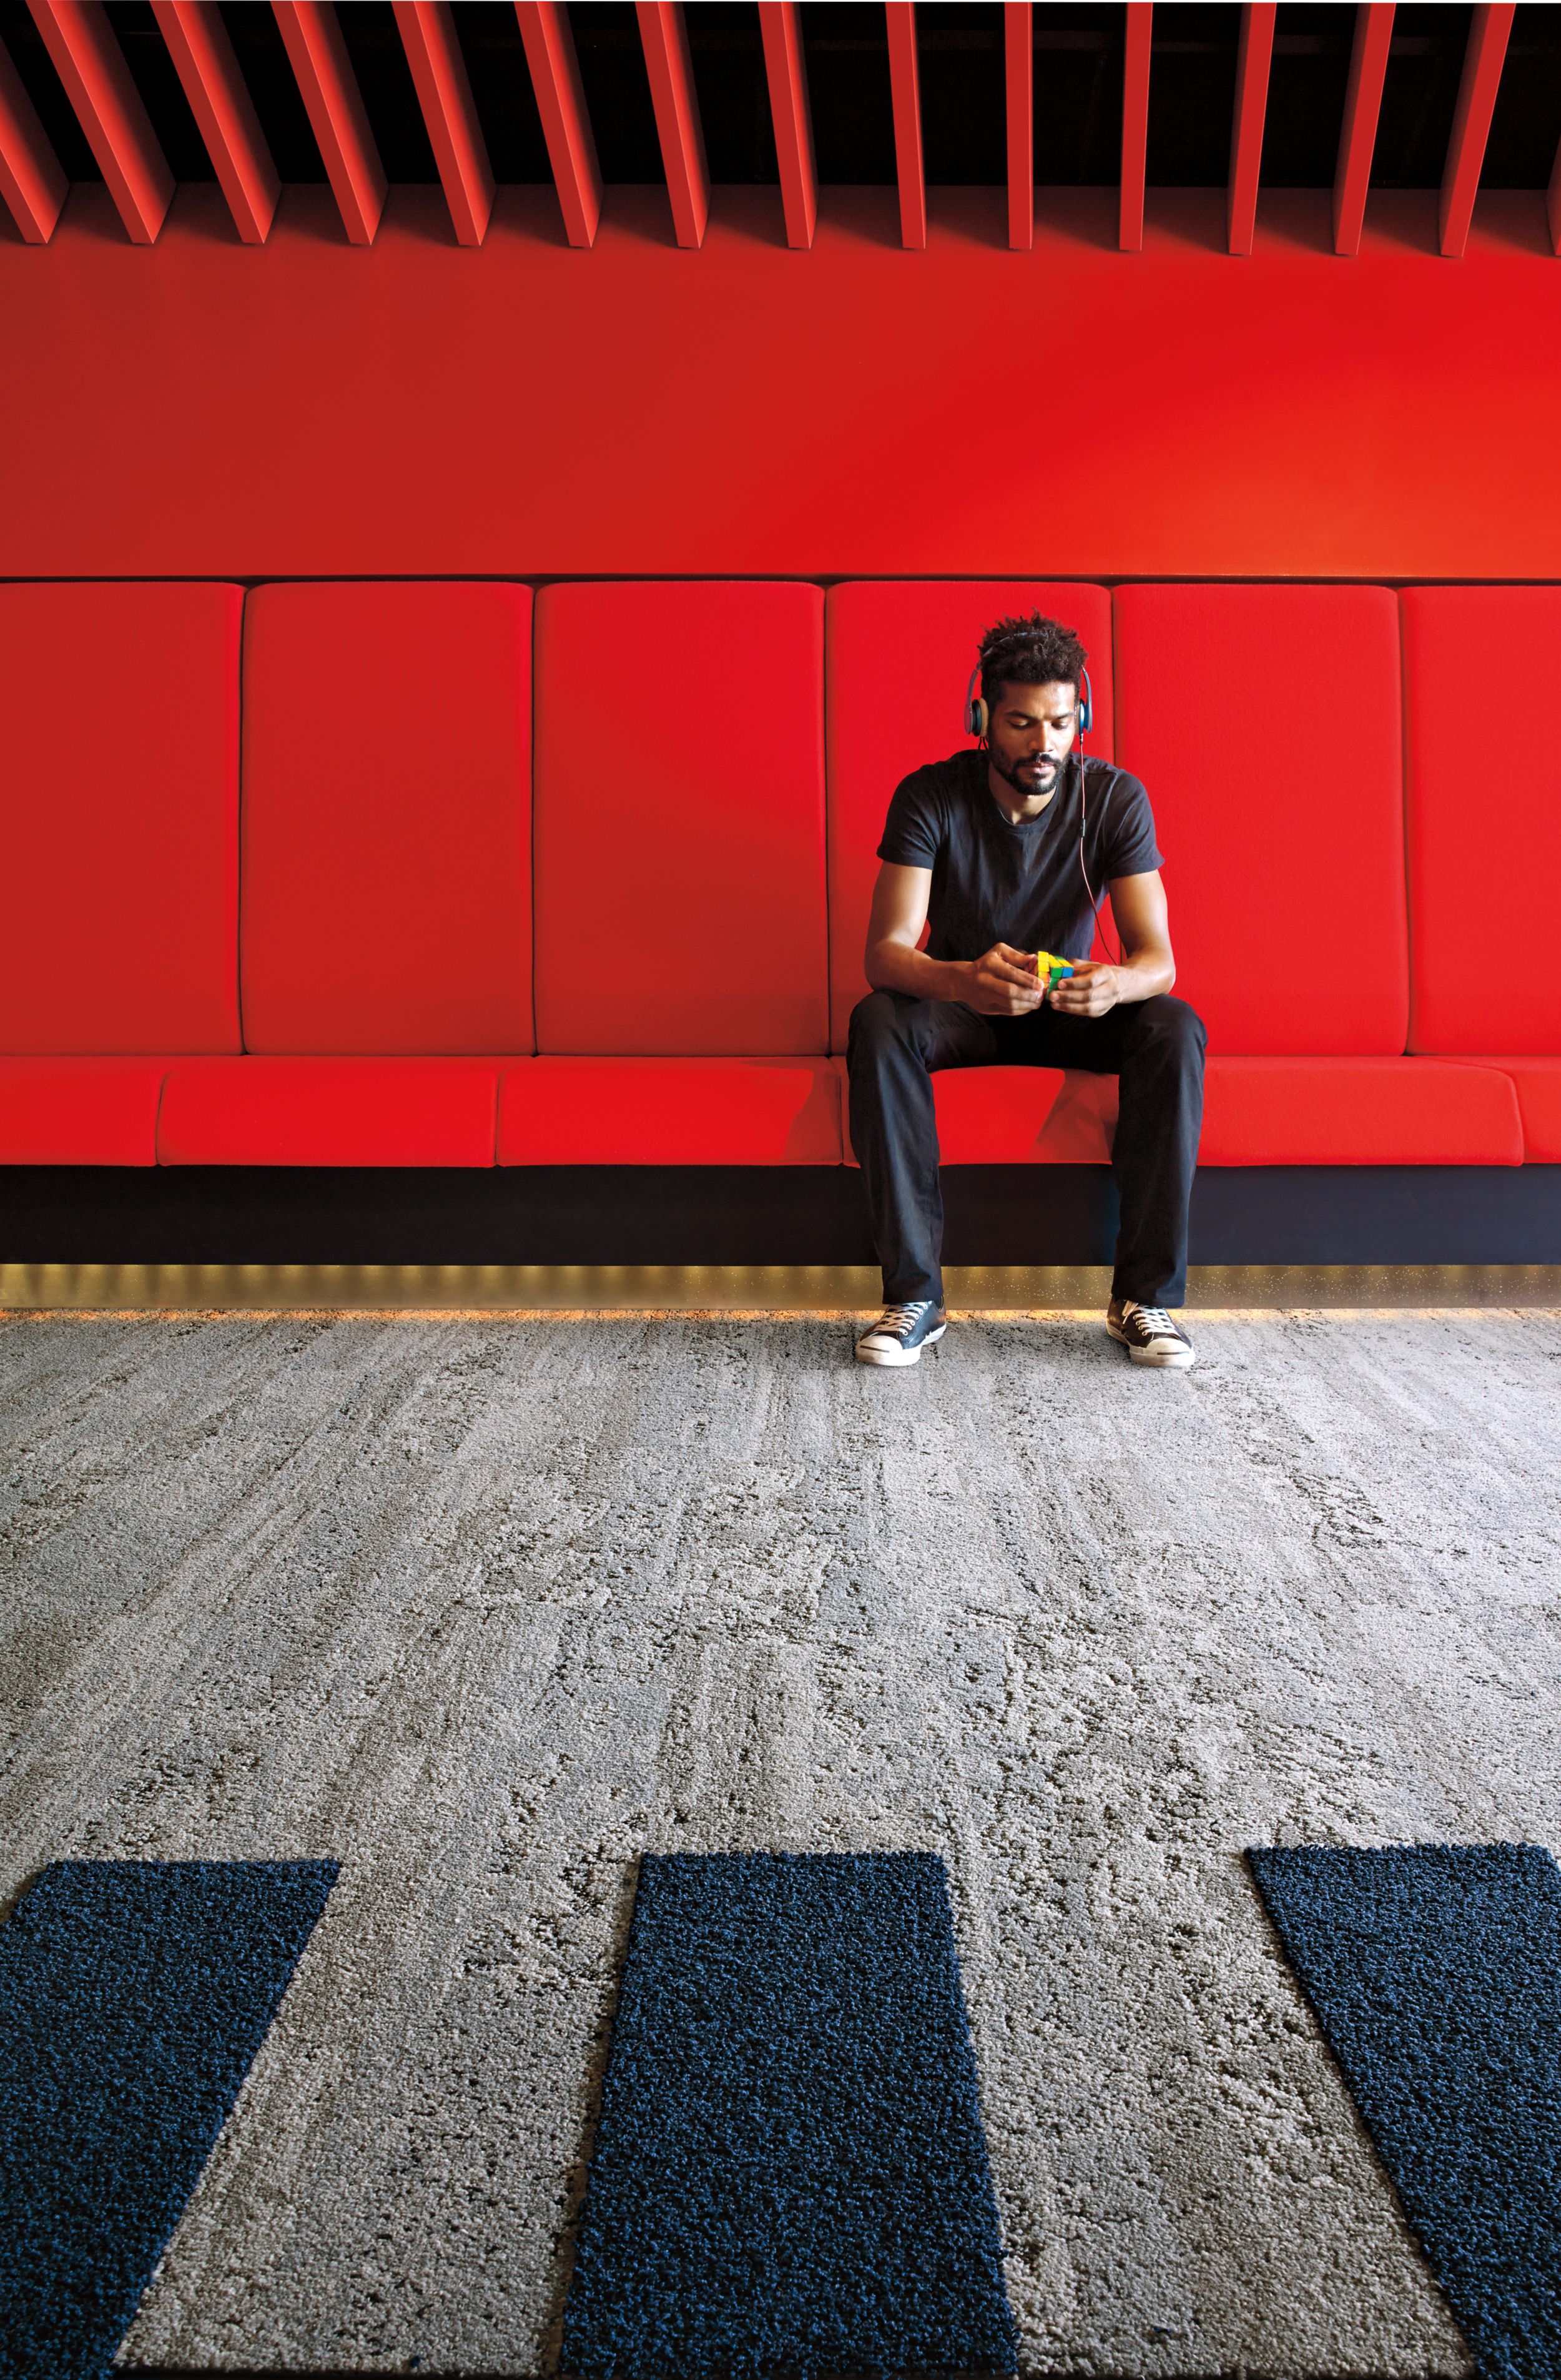 Interface HN810 plank carpet tile in waiting area with red bench and wall and man listening to music imagen número 7